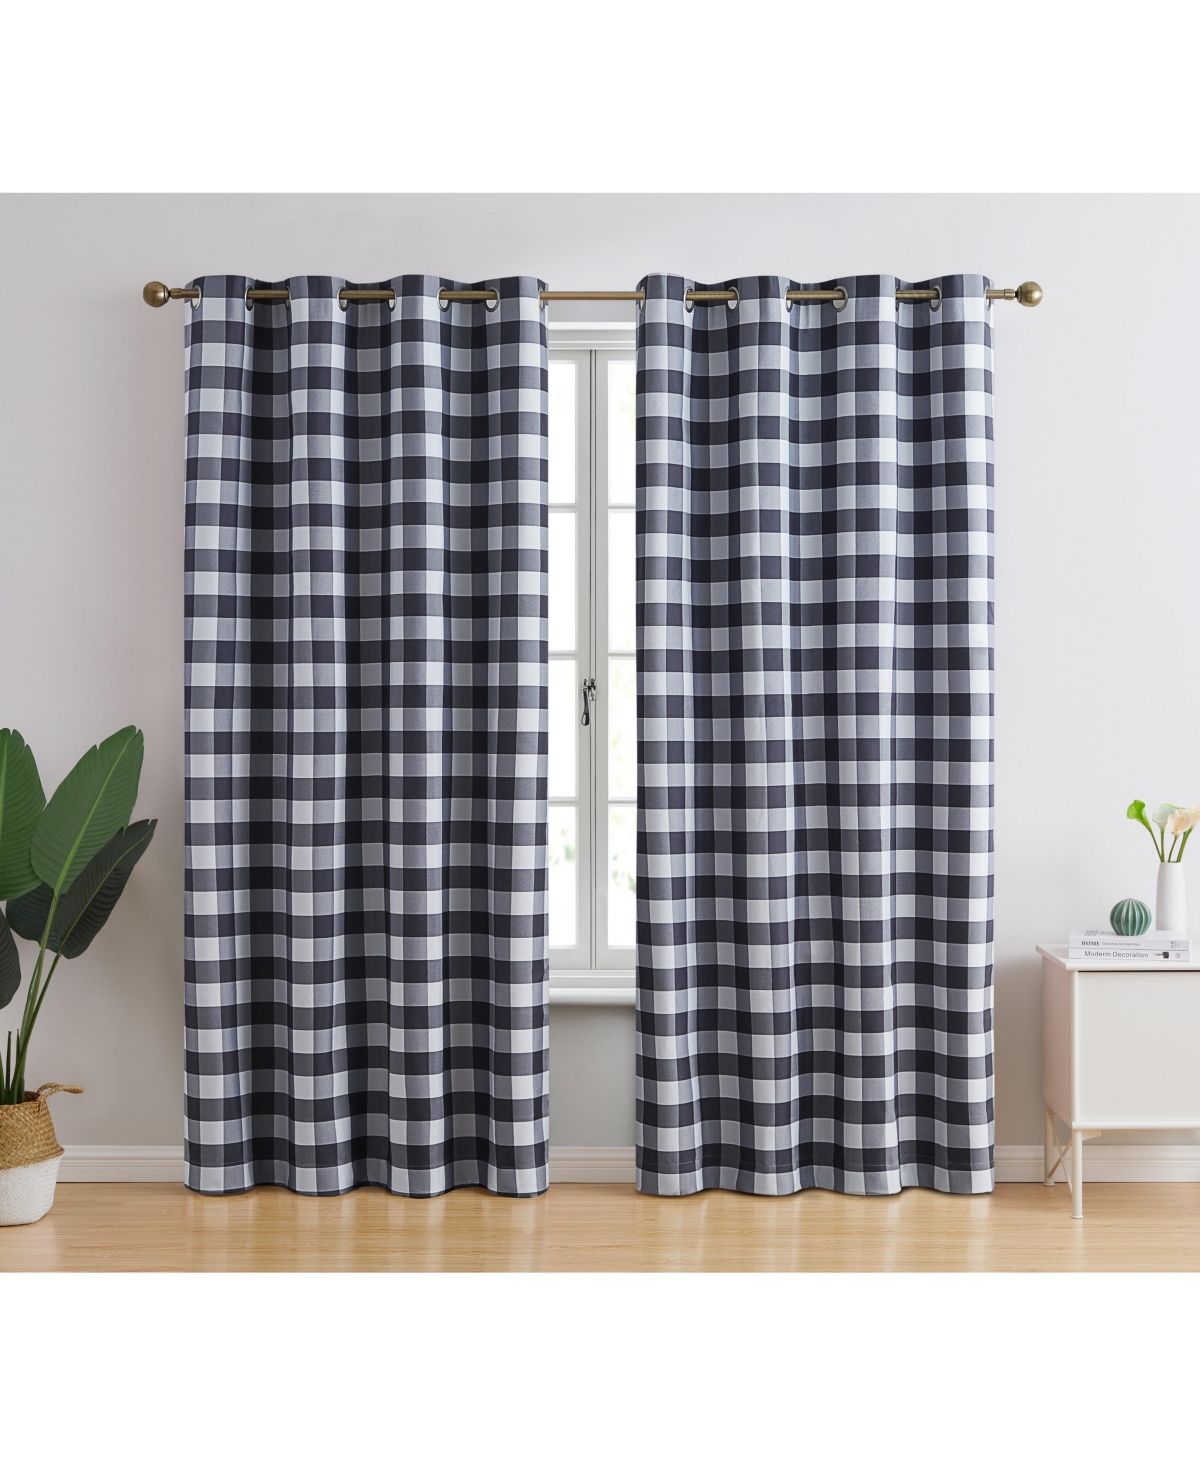 Andersen Buffalo Check Plaid 100% Blackout Thermal Insulated Energy Savings Heat/Cold Blocking Grommet Curtain Drapery Panels for Bedroom & Liv